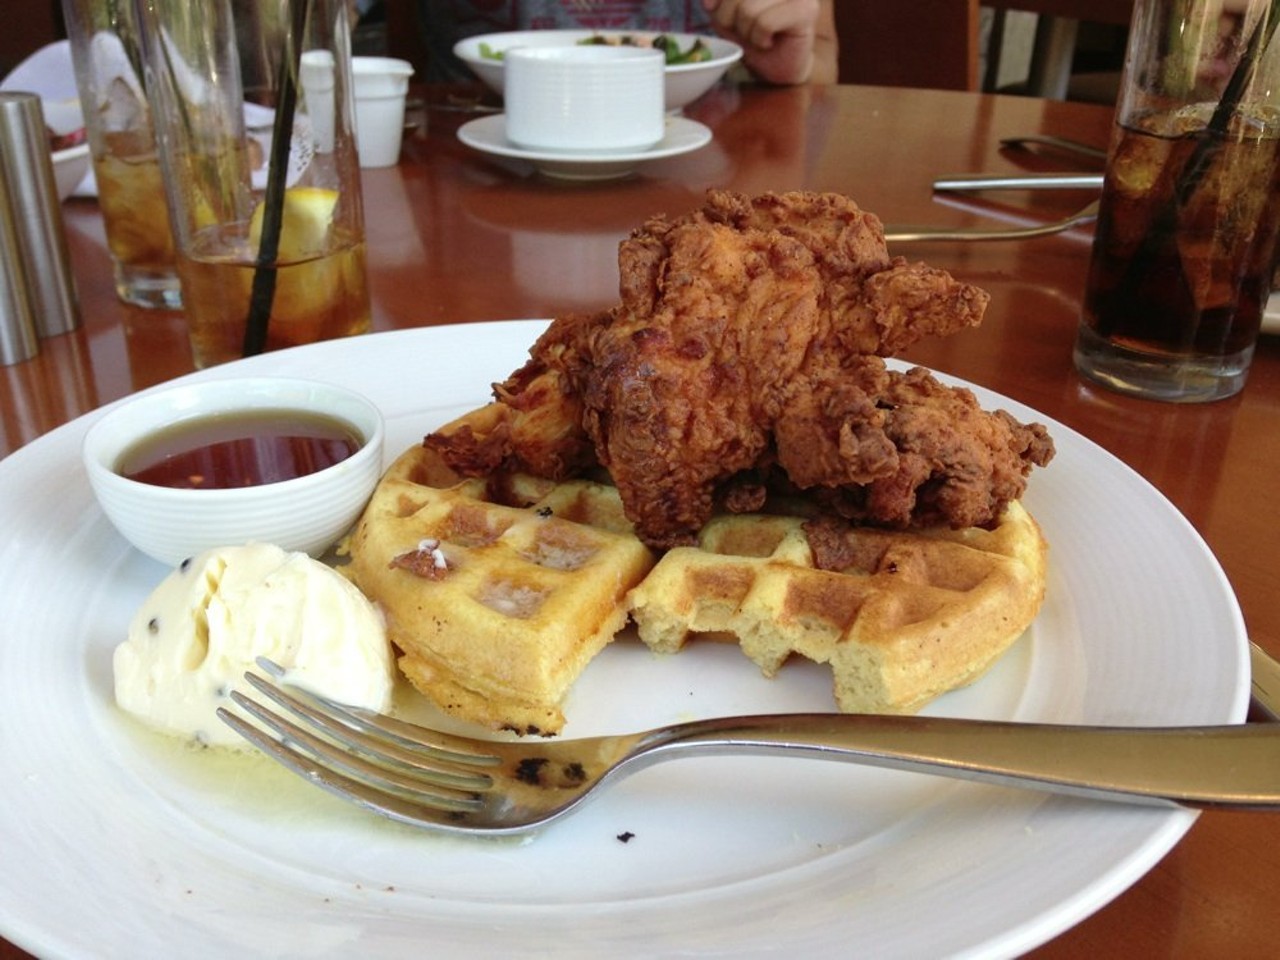 Chicken and waffles - Washington Place Bistro & Inn - 2203 Cornell Rd